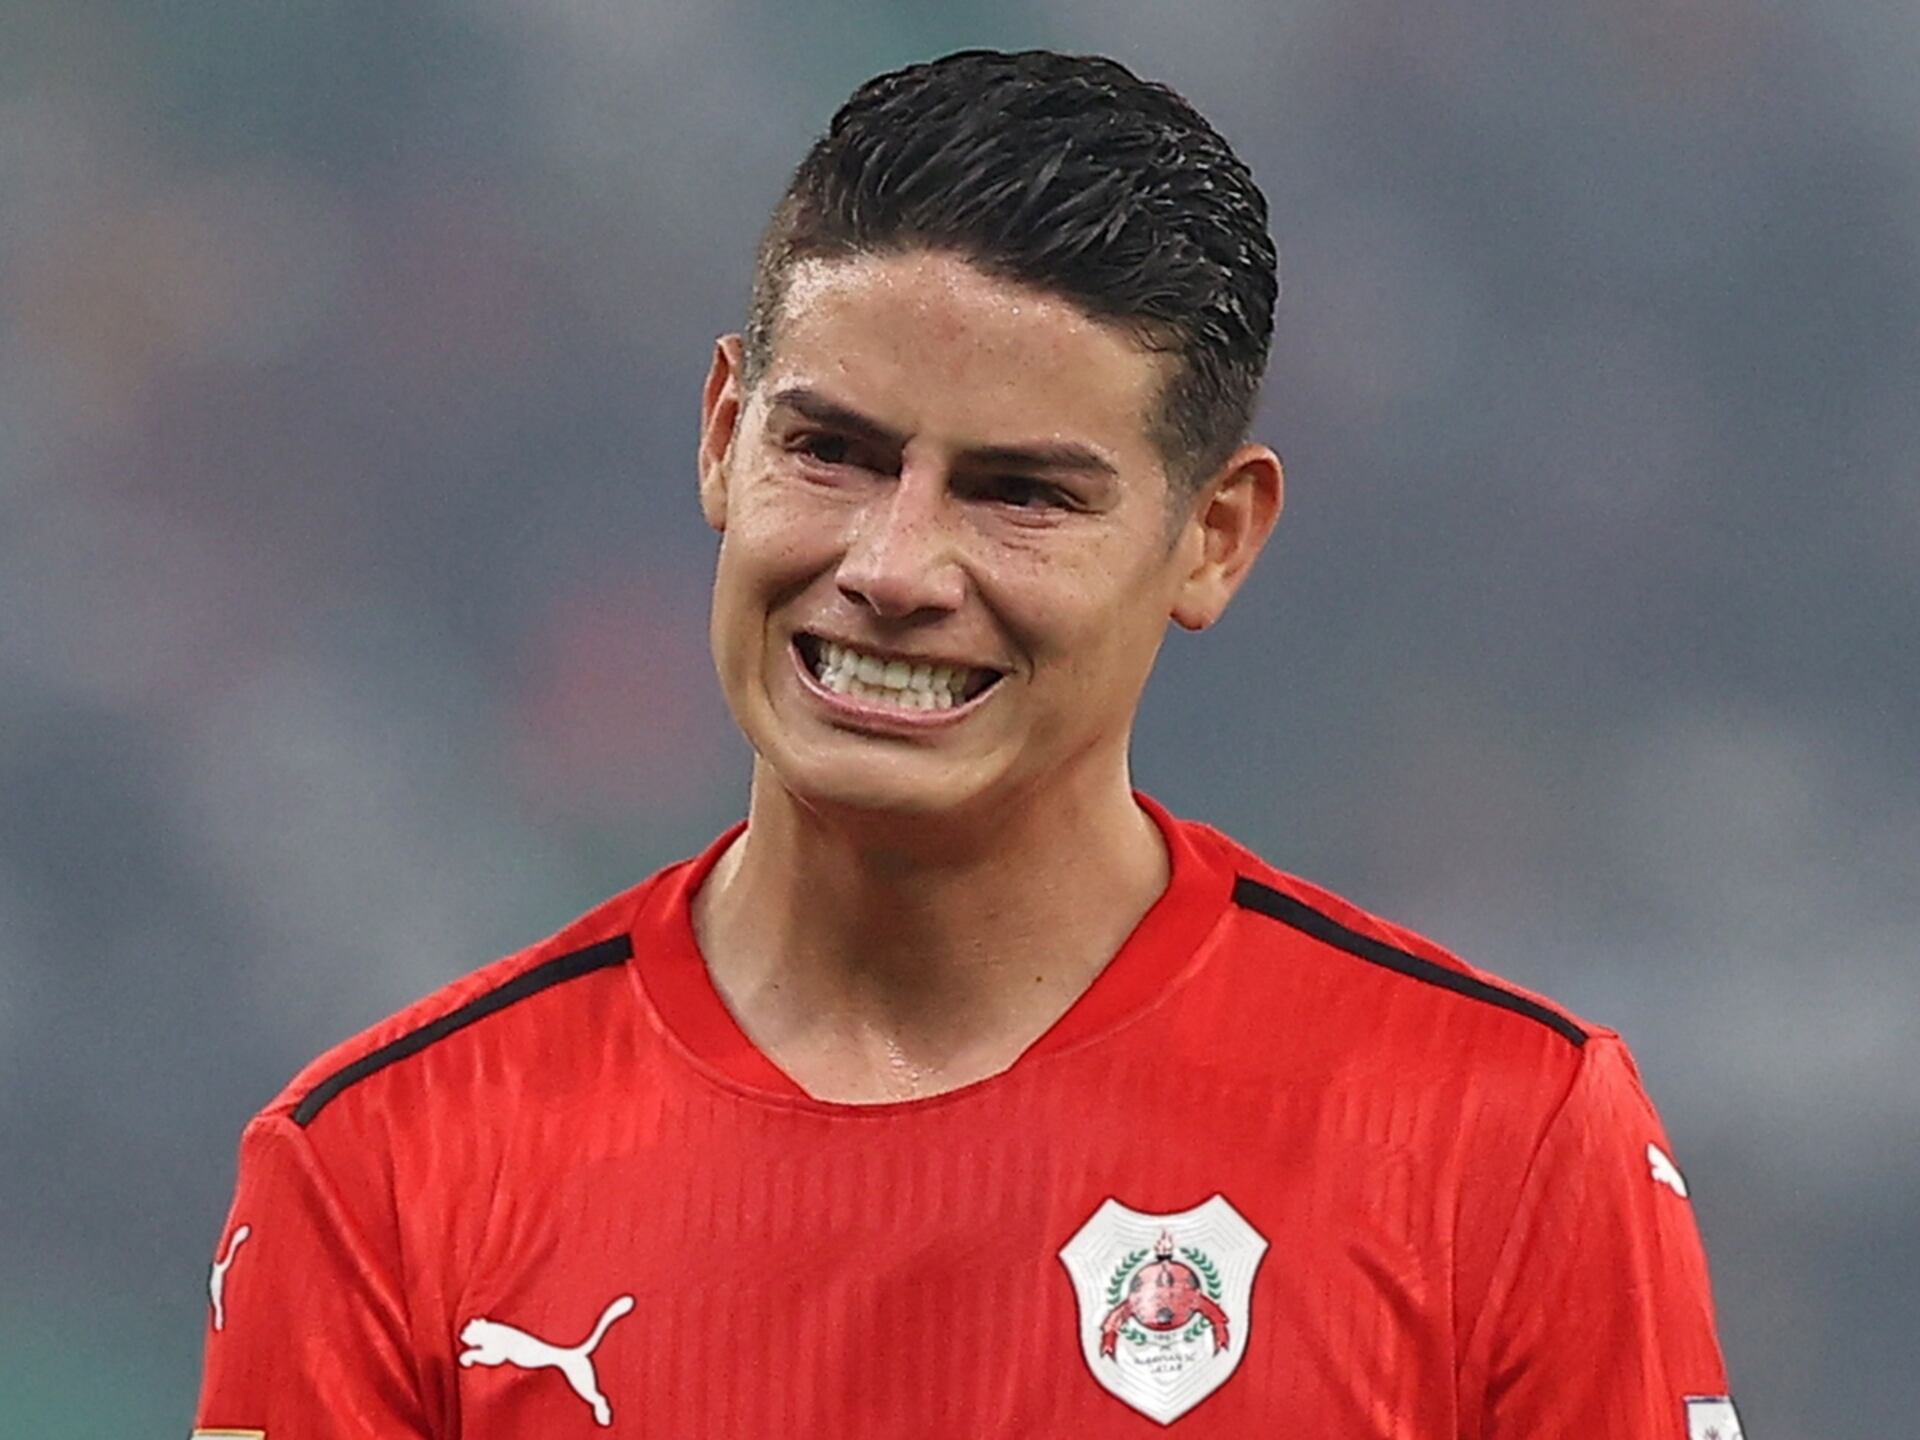 James Rodriguez moment madness of madness in Qatar: see how much he makes and his numbers